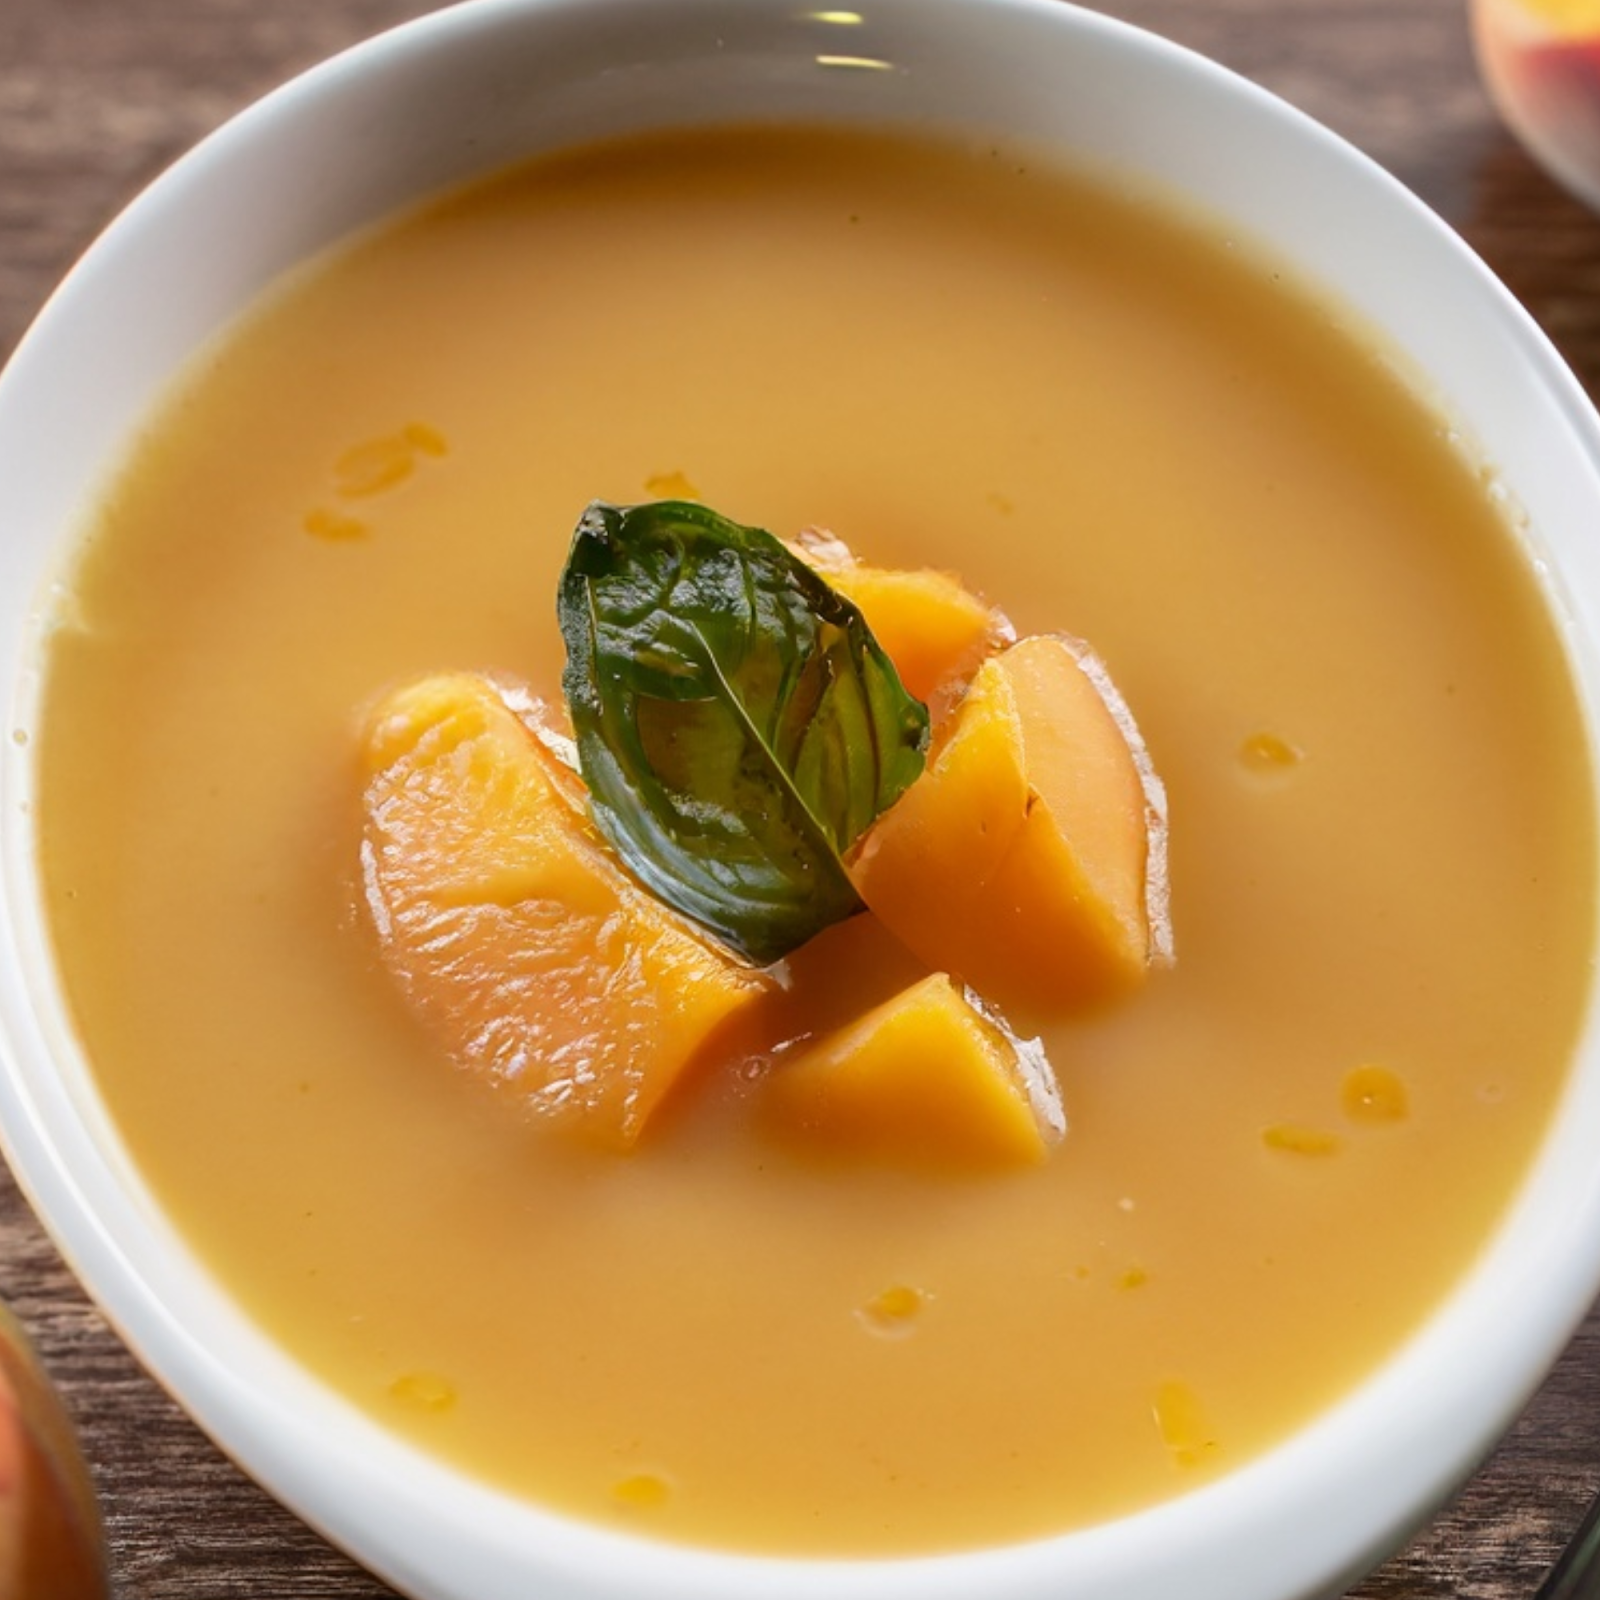 chilled peach soup